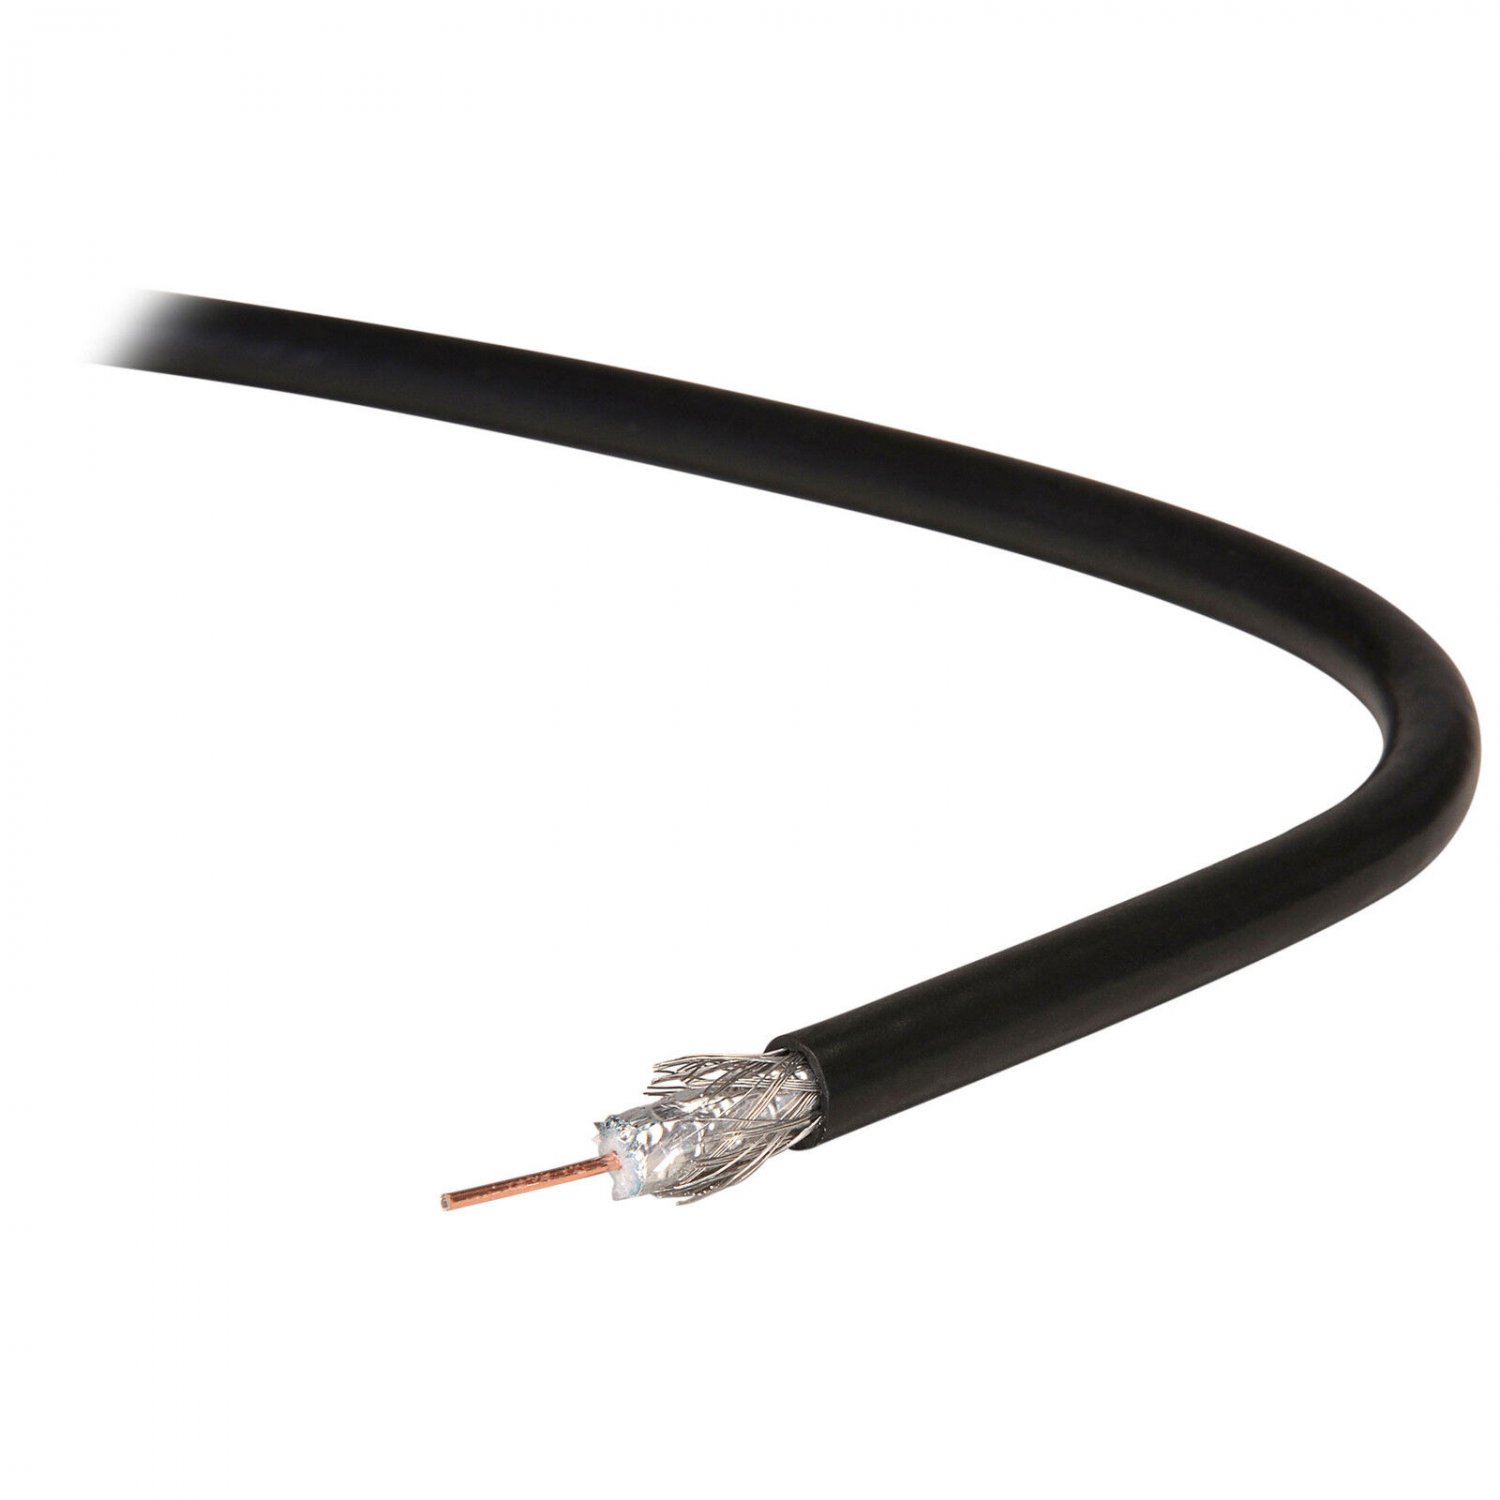 Belden 9116 100 ft. RG-6/U CATV Coaxial Cable 75 Ohm